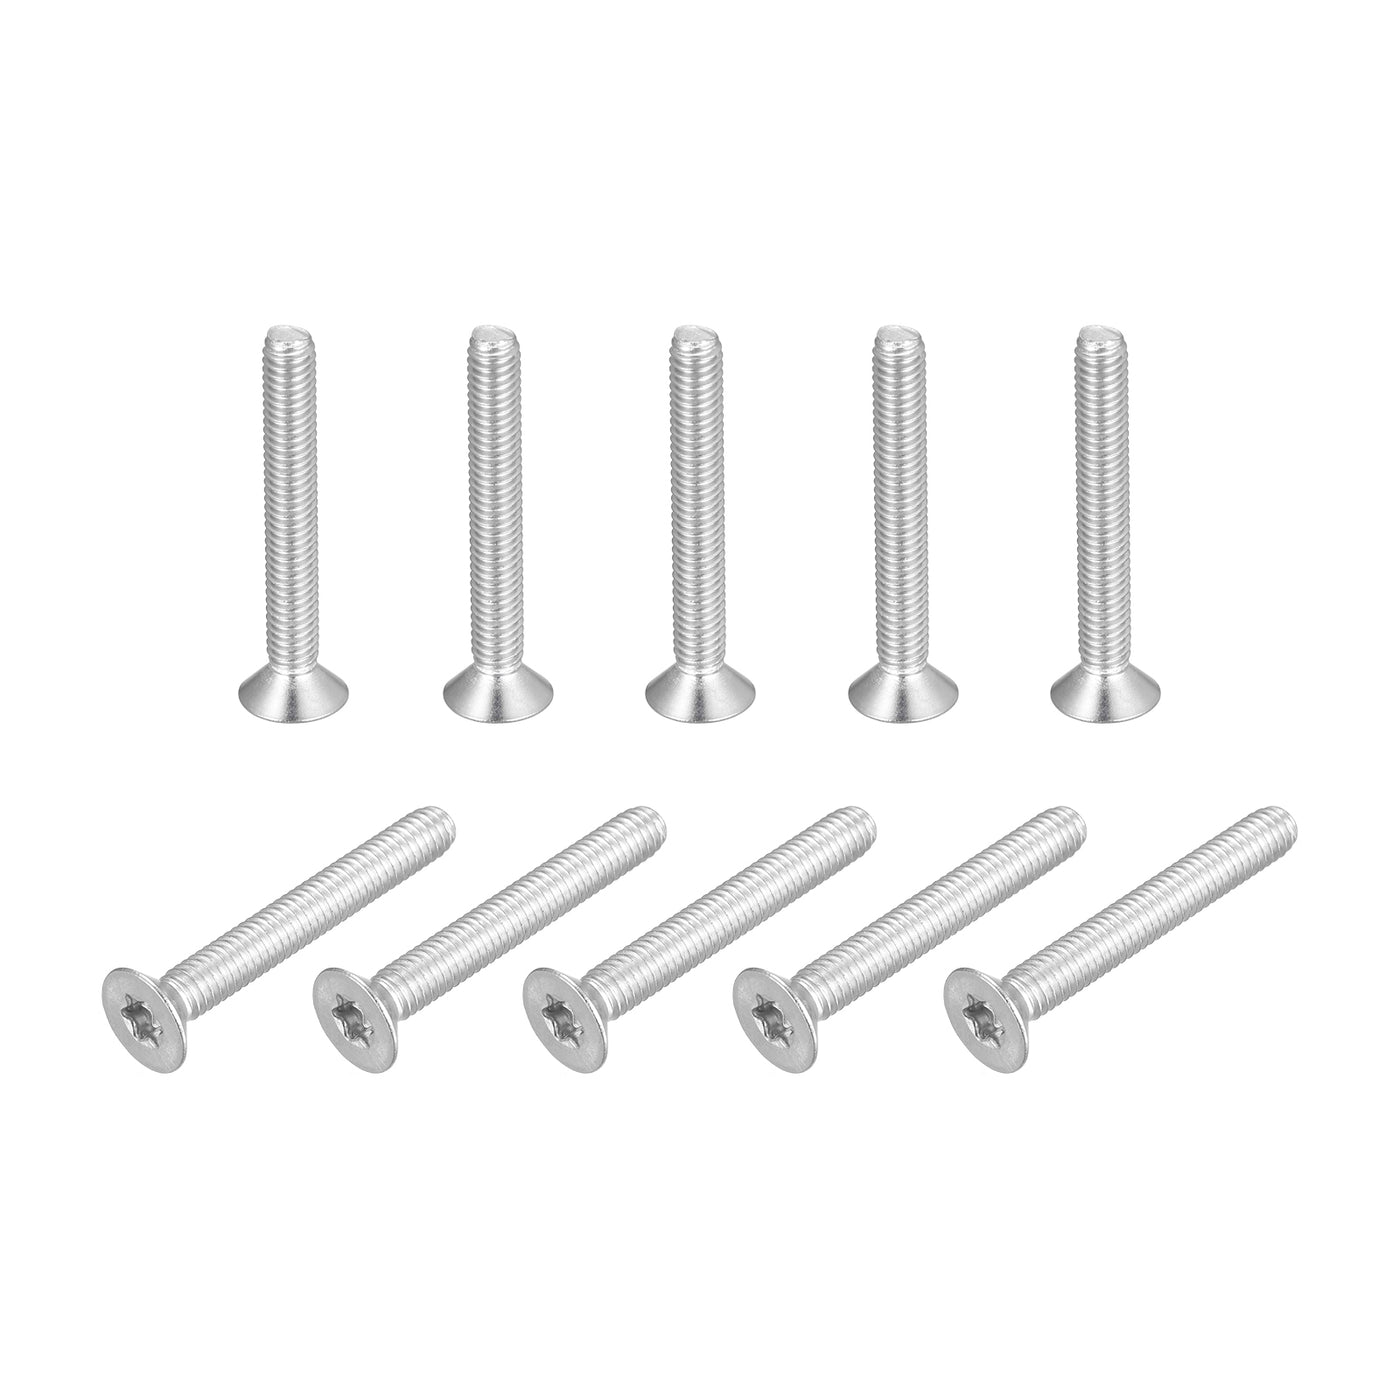 uxcell Uxcell M4x30mm Torx Security Screws, 10pcs 316 Stainless Steel Countersunk Head Screw